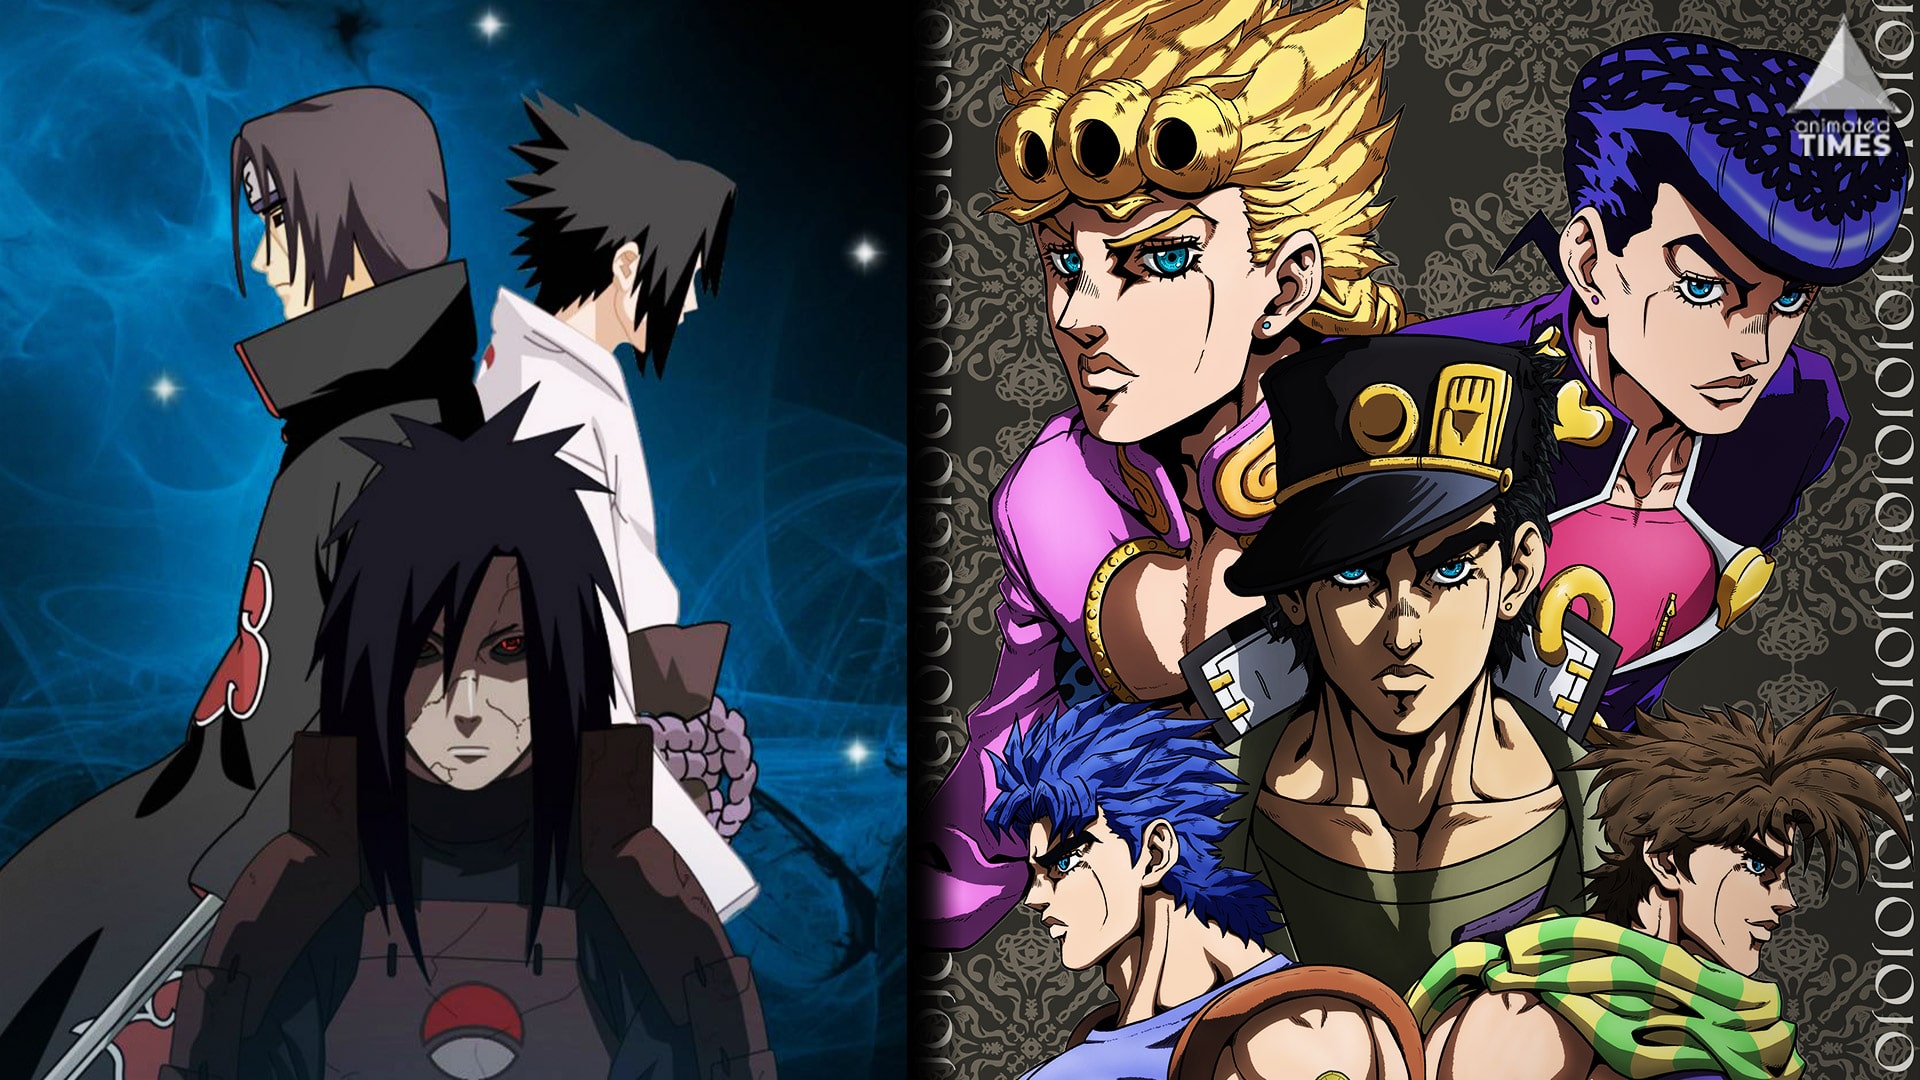 12 Strongest Anime Families, Ranked - Animated Times